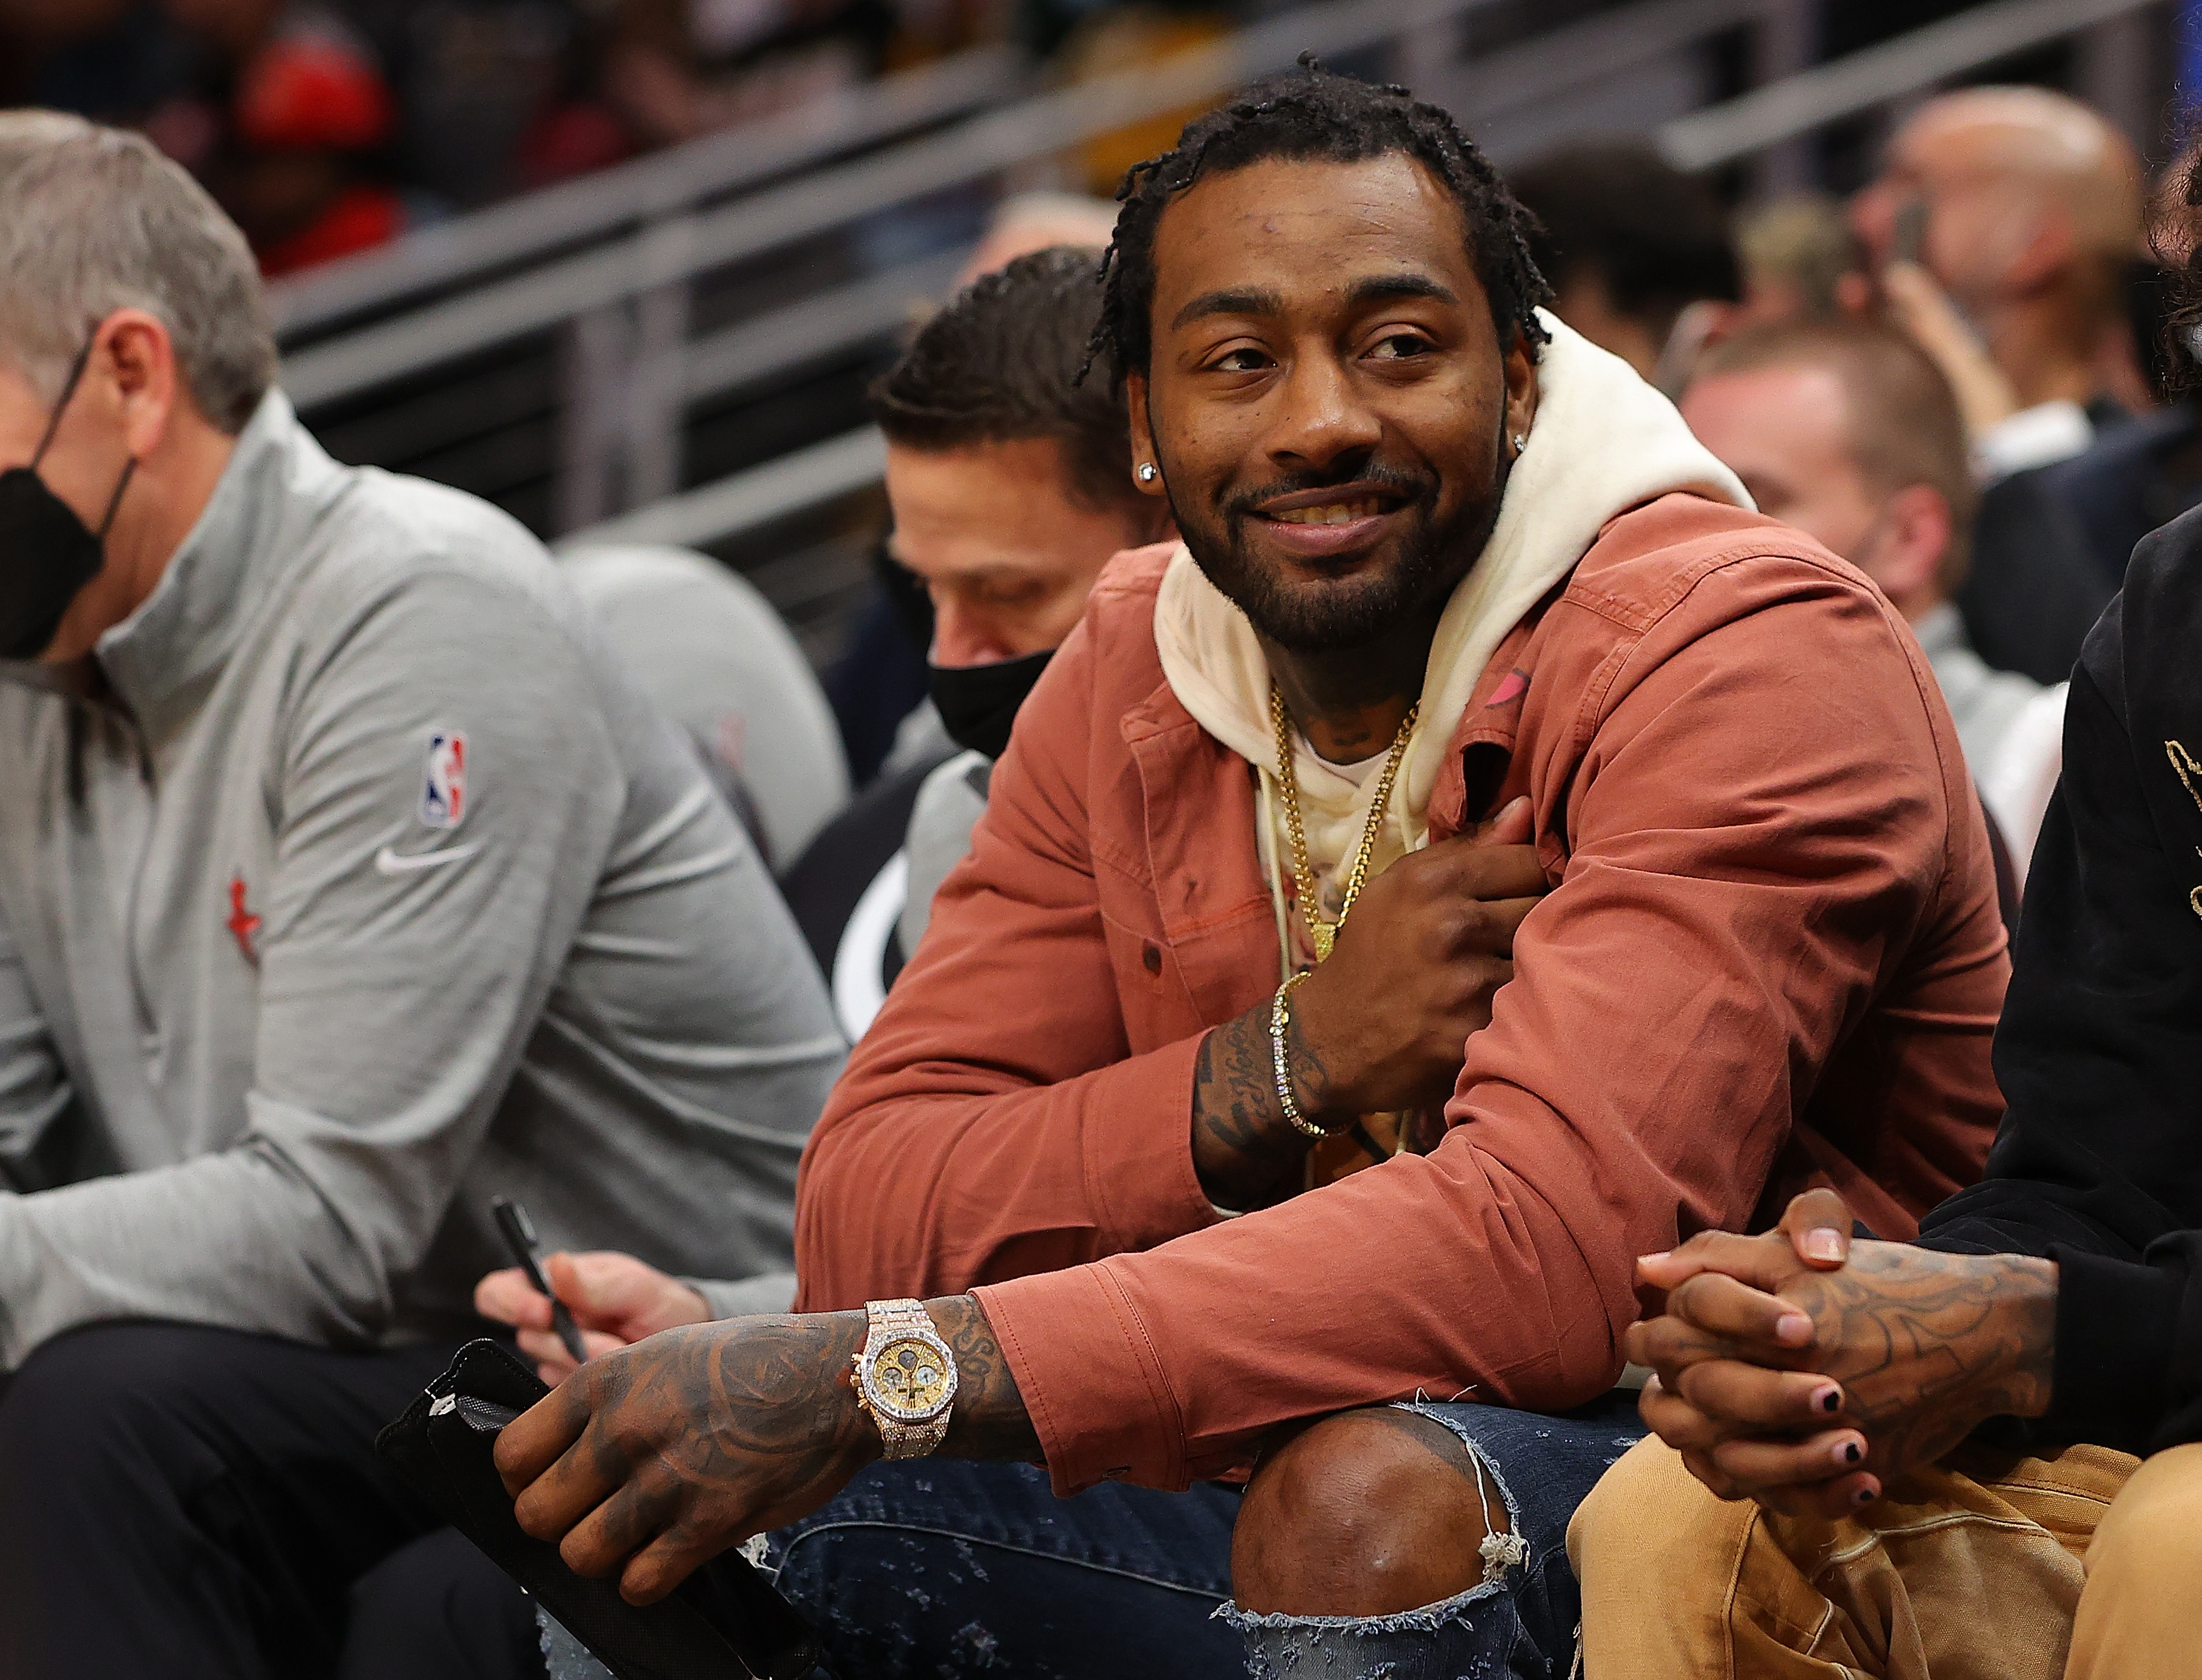 Houston Rockets point guard John Wall sits on the bench during an NBA game against the Atlanta Hawks in December 2021